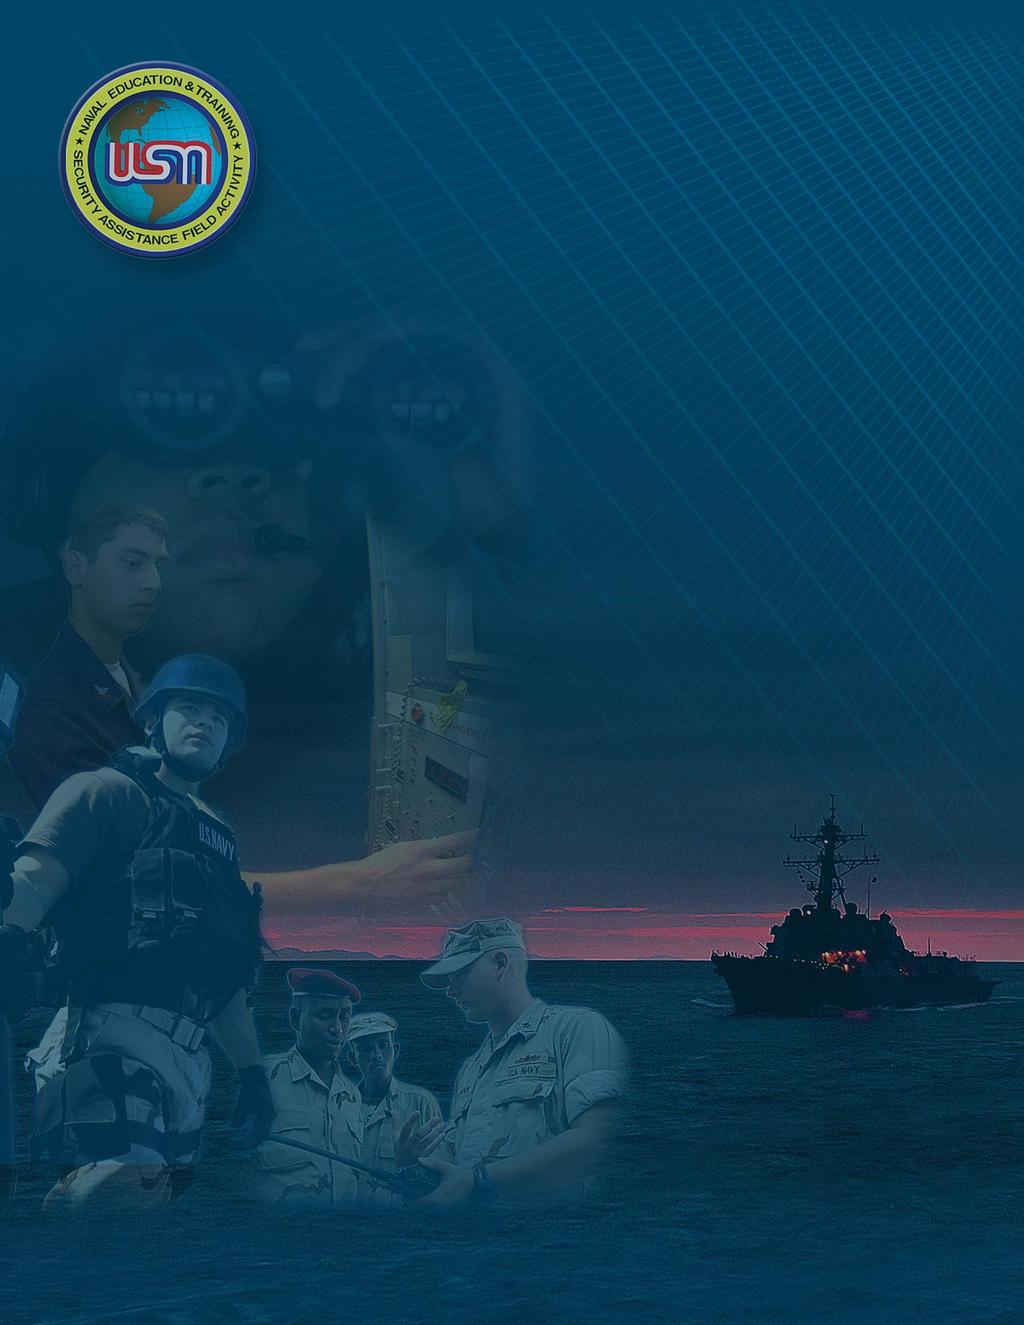 The Naval Education and Training Security